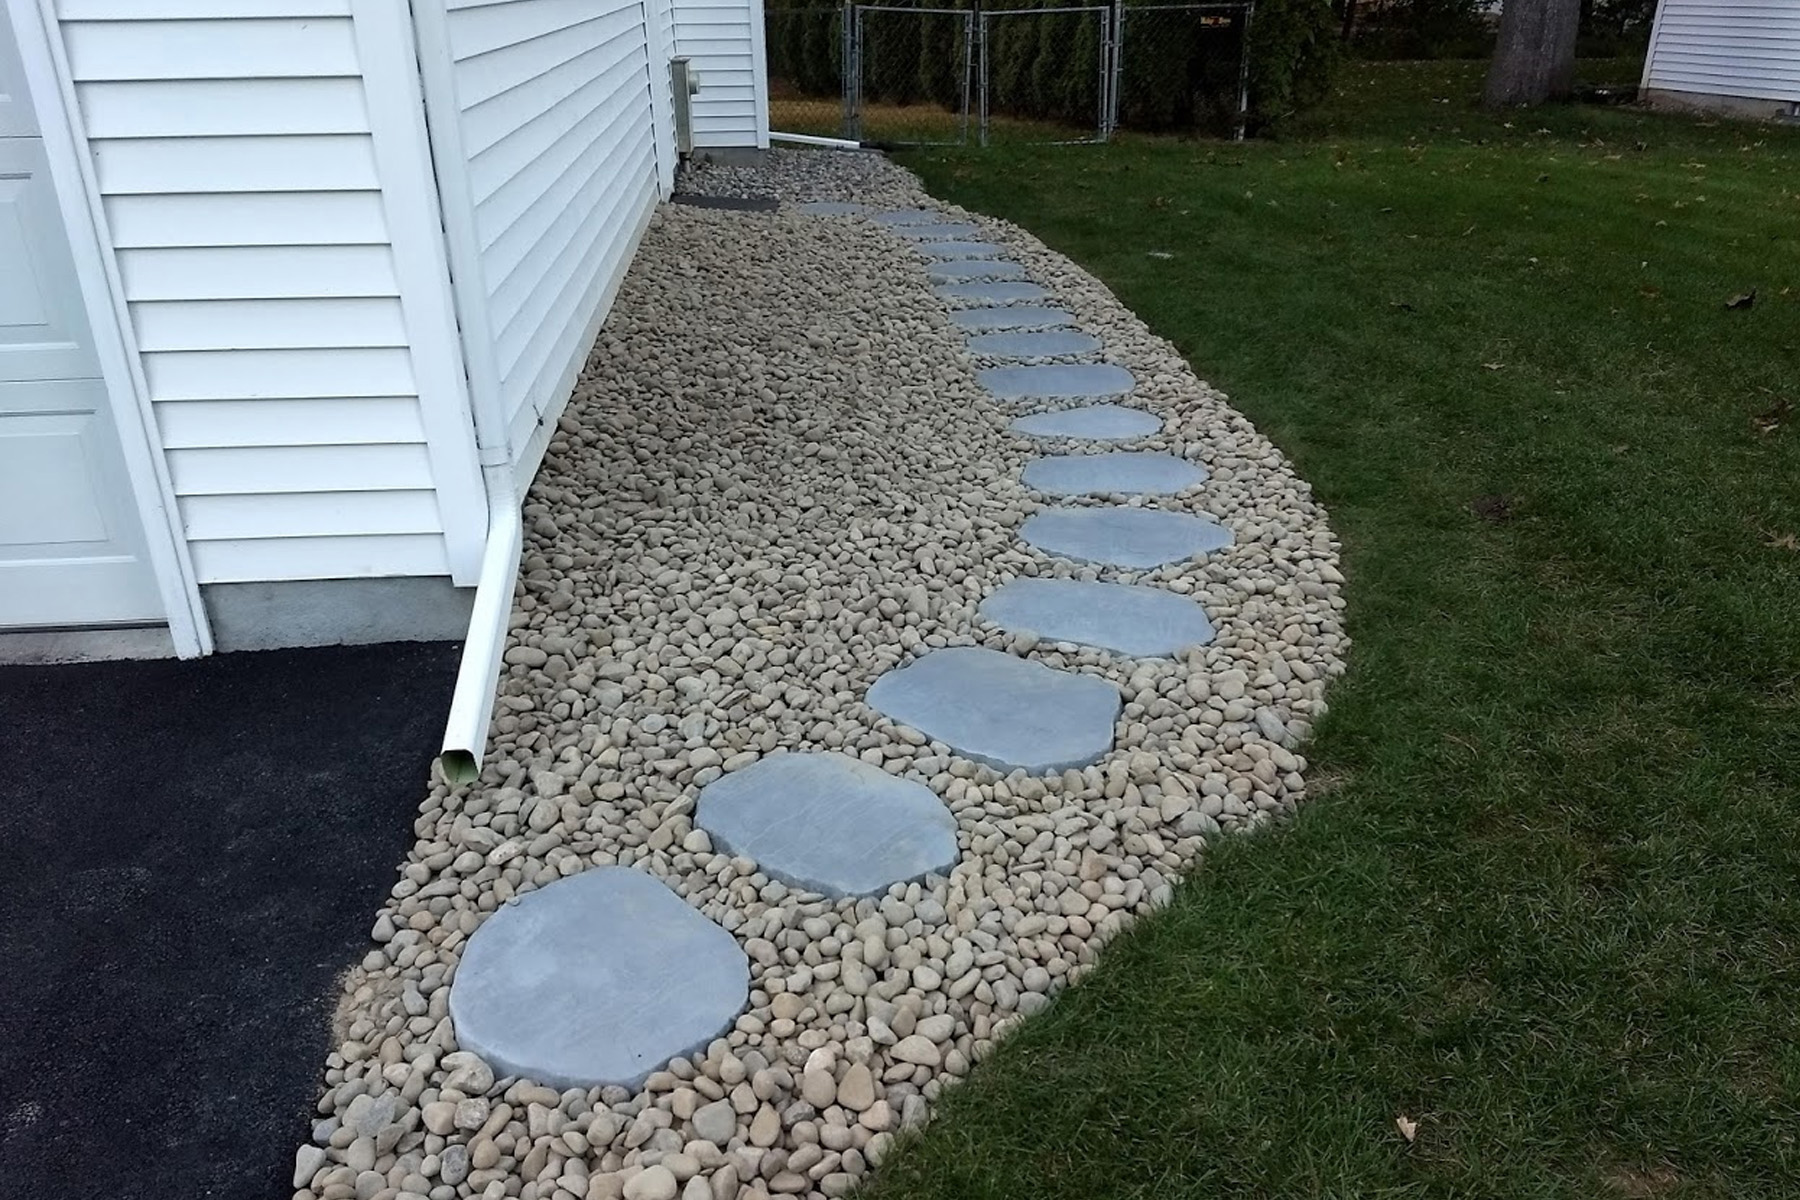 The completed paver path with smooth lanscaping rocks surrounding the pavers along the side of the garage